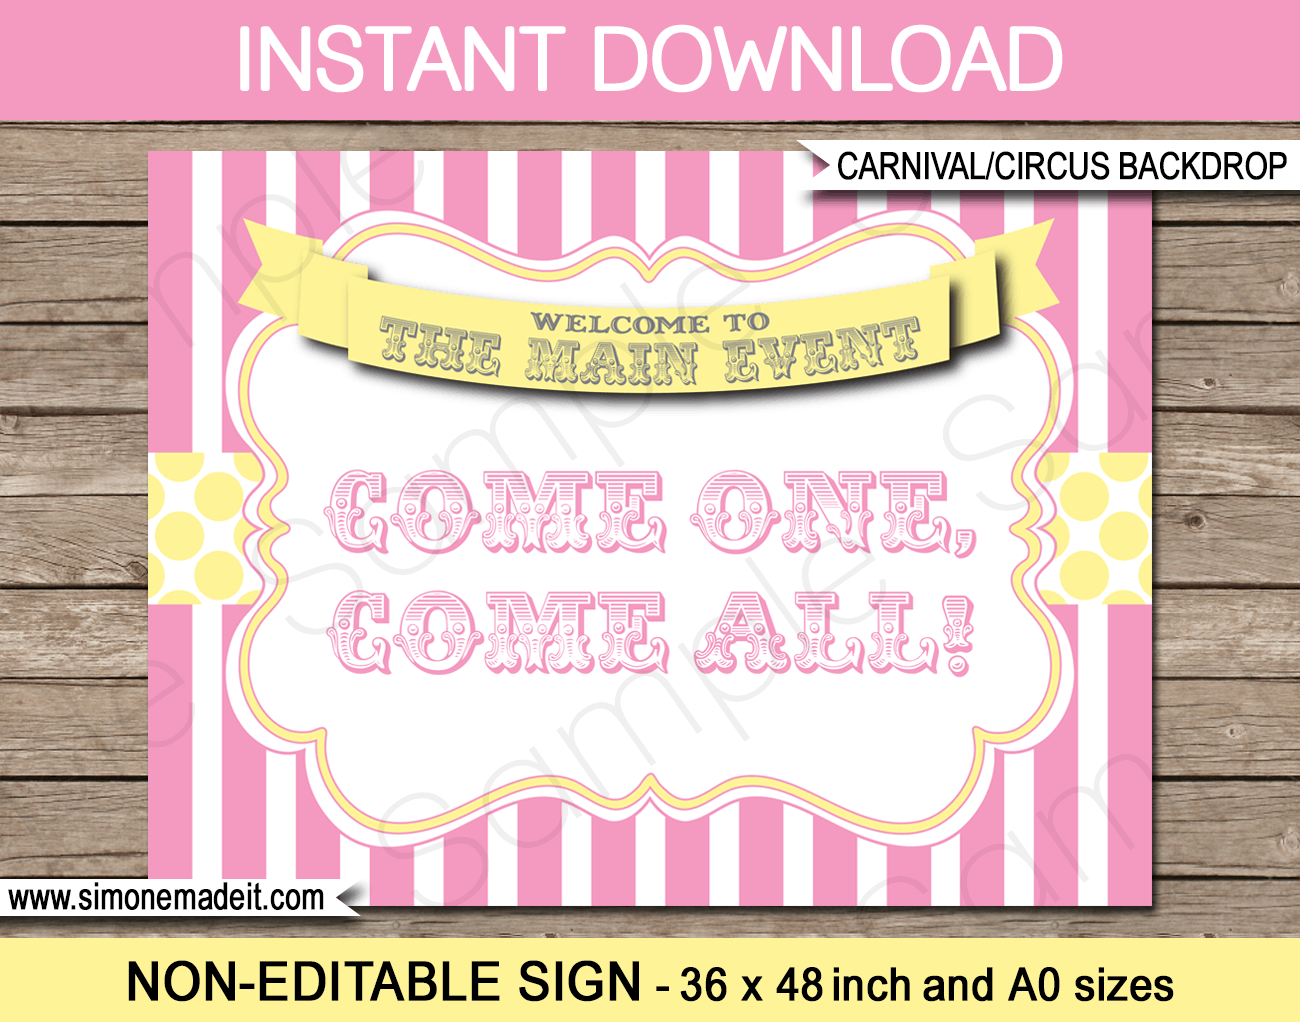 Printable Carnival Backdrop Sign | Come One Come All | Circus Party | Pink Yellow Decorations | DIY Template | INSTANT DOWNLOAD via simonemadeit.com